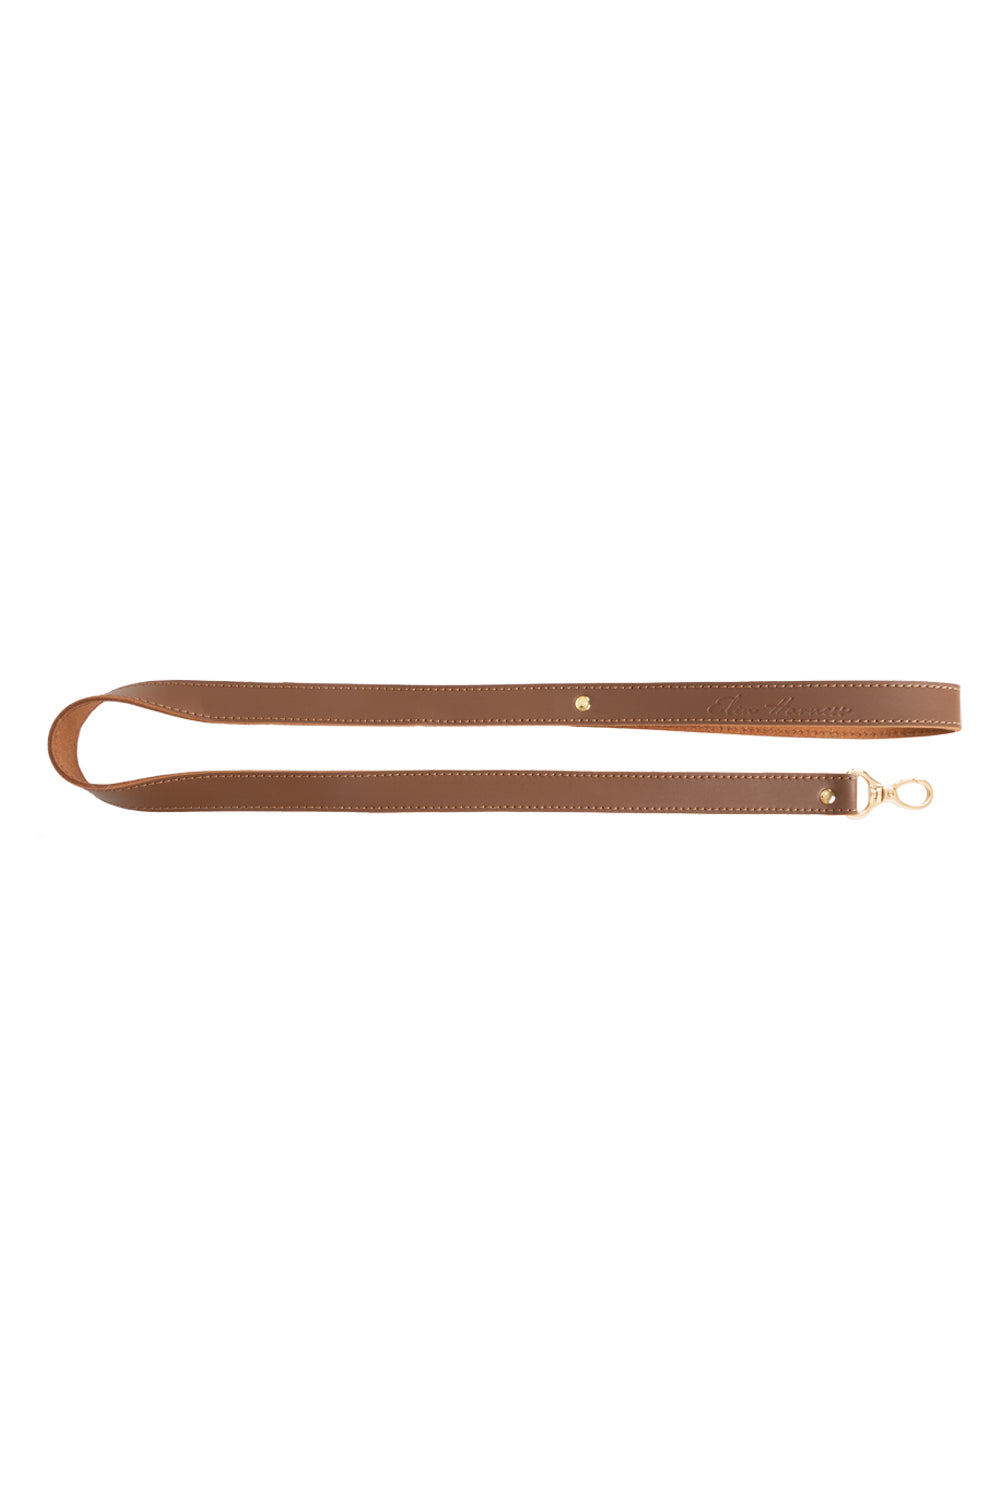 Leather leash. Brown